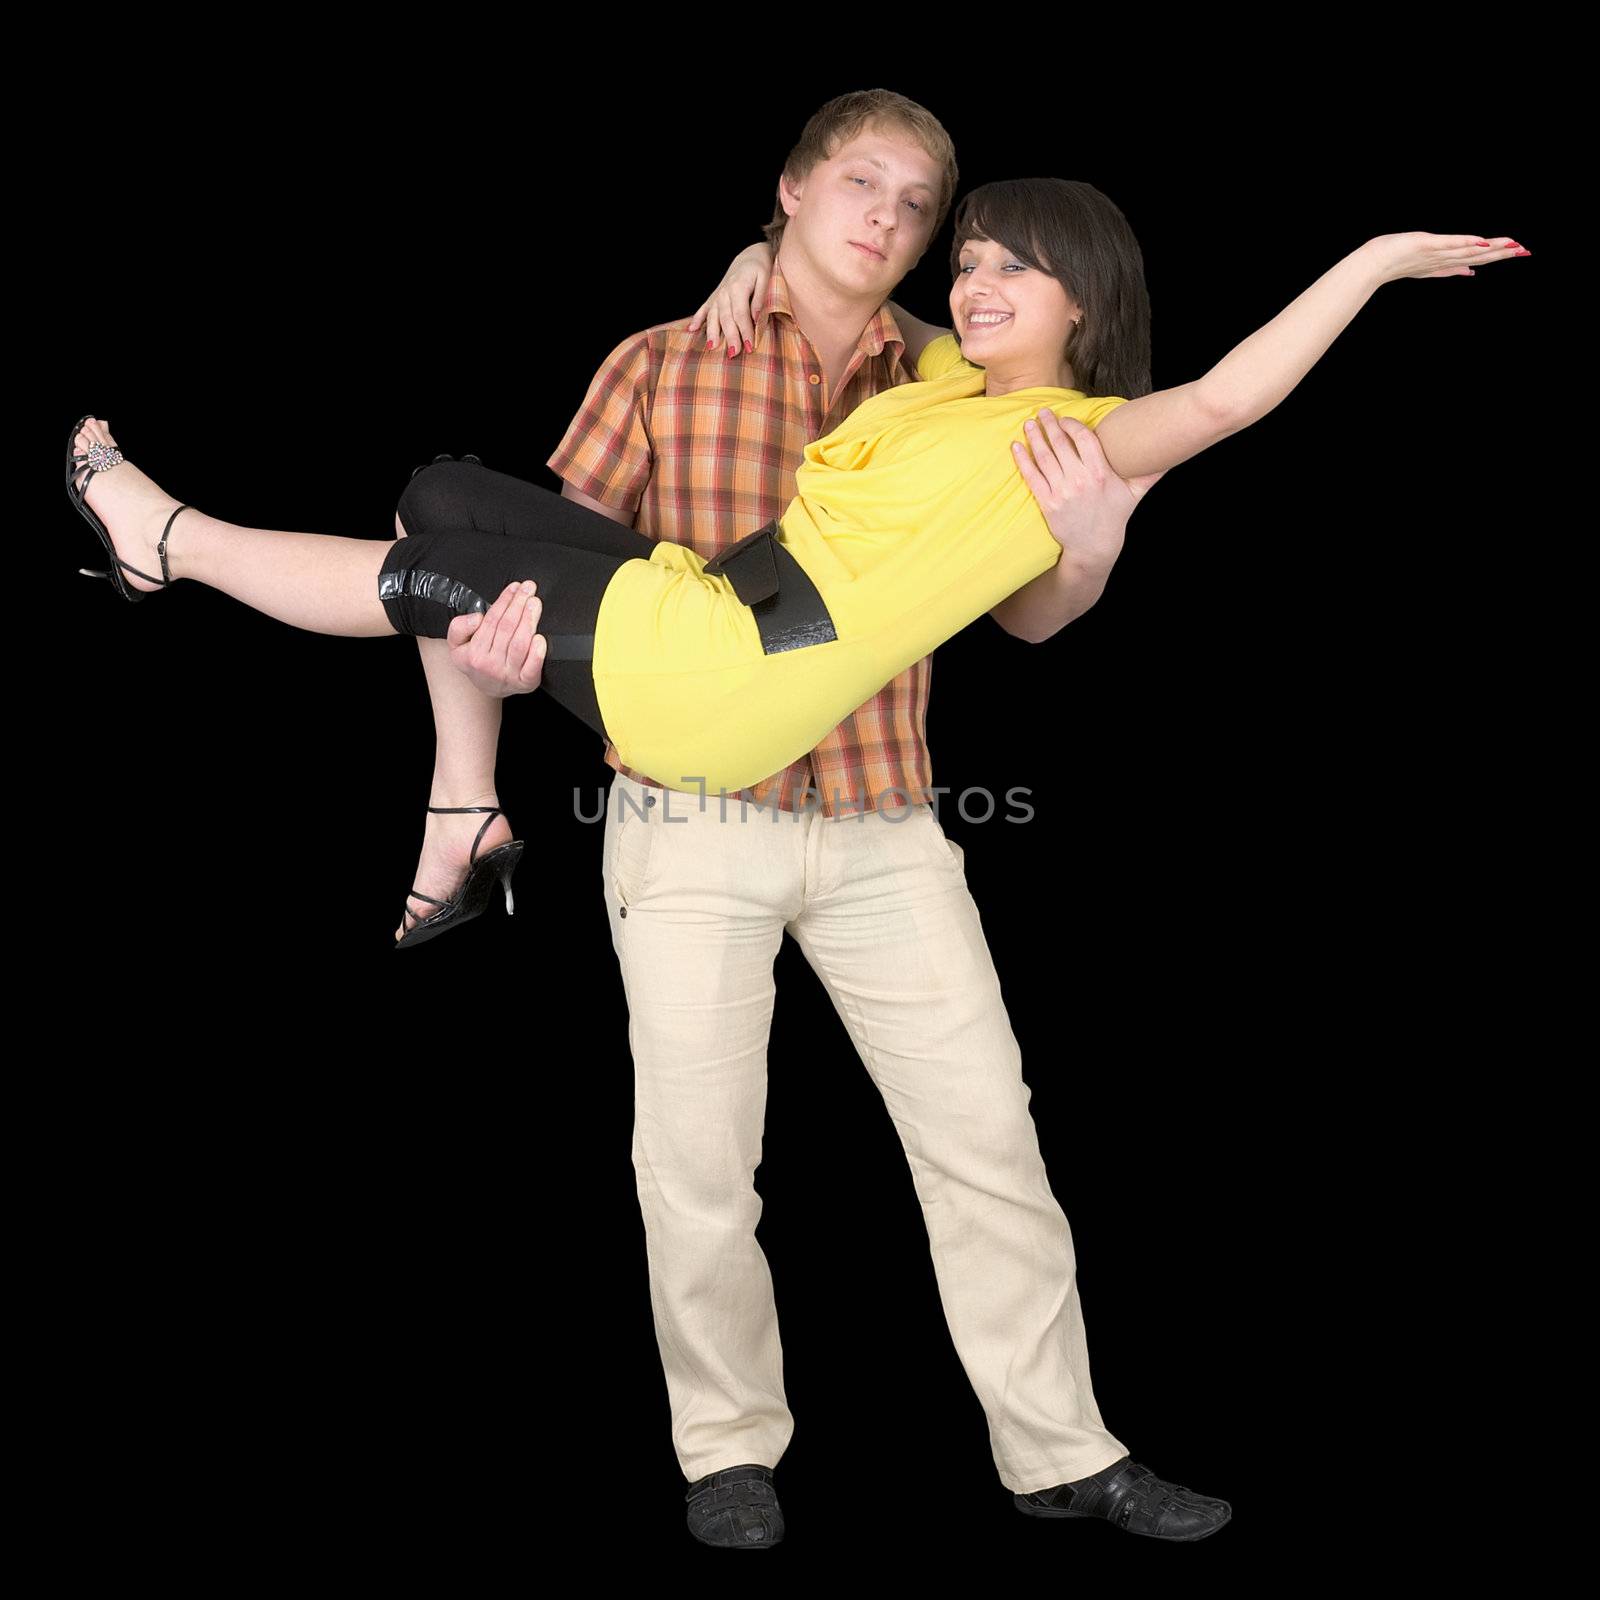 The young man holds the girlfriend on hands